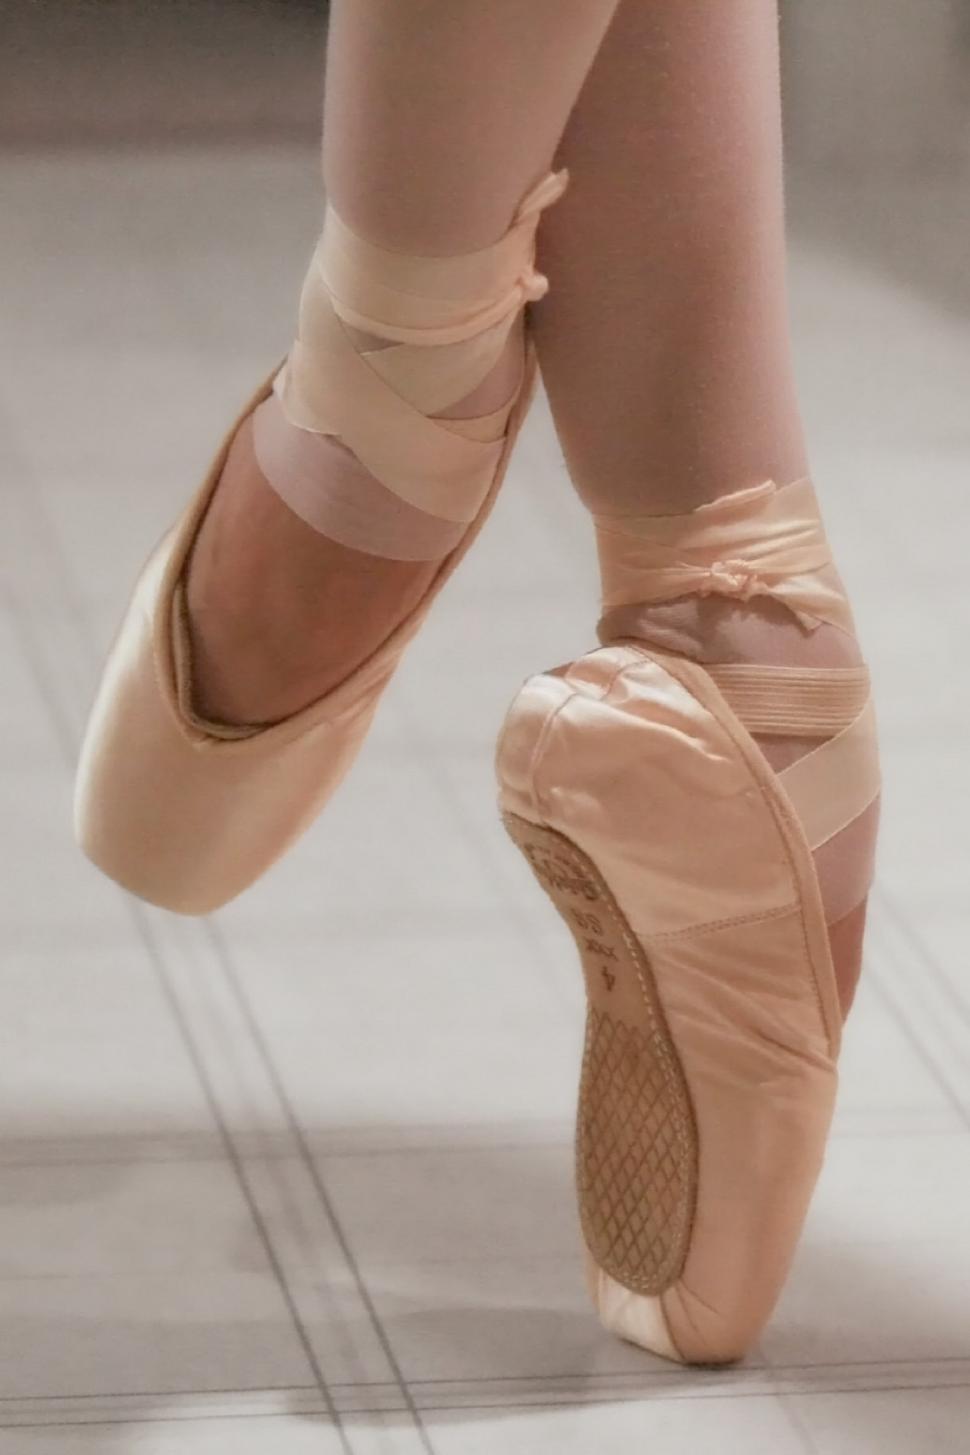 Free Image of Close Up of Persons Ballet Shoes 